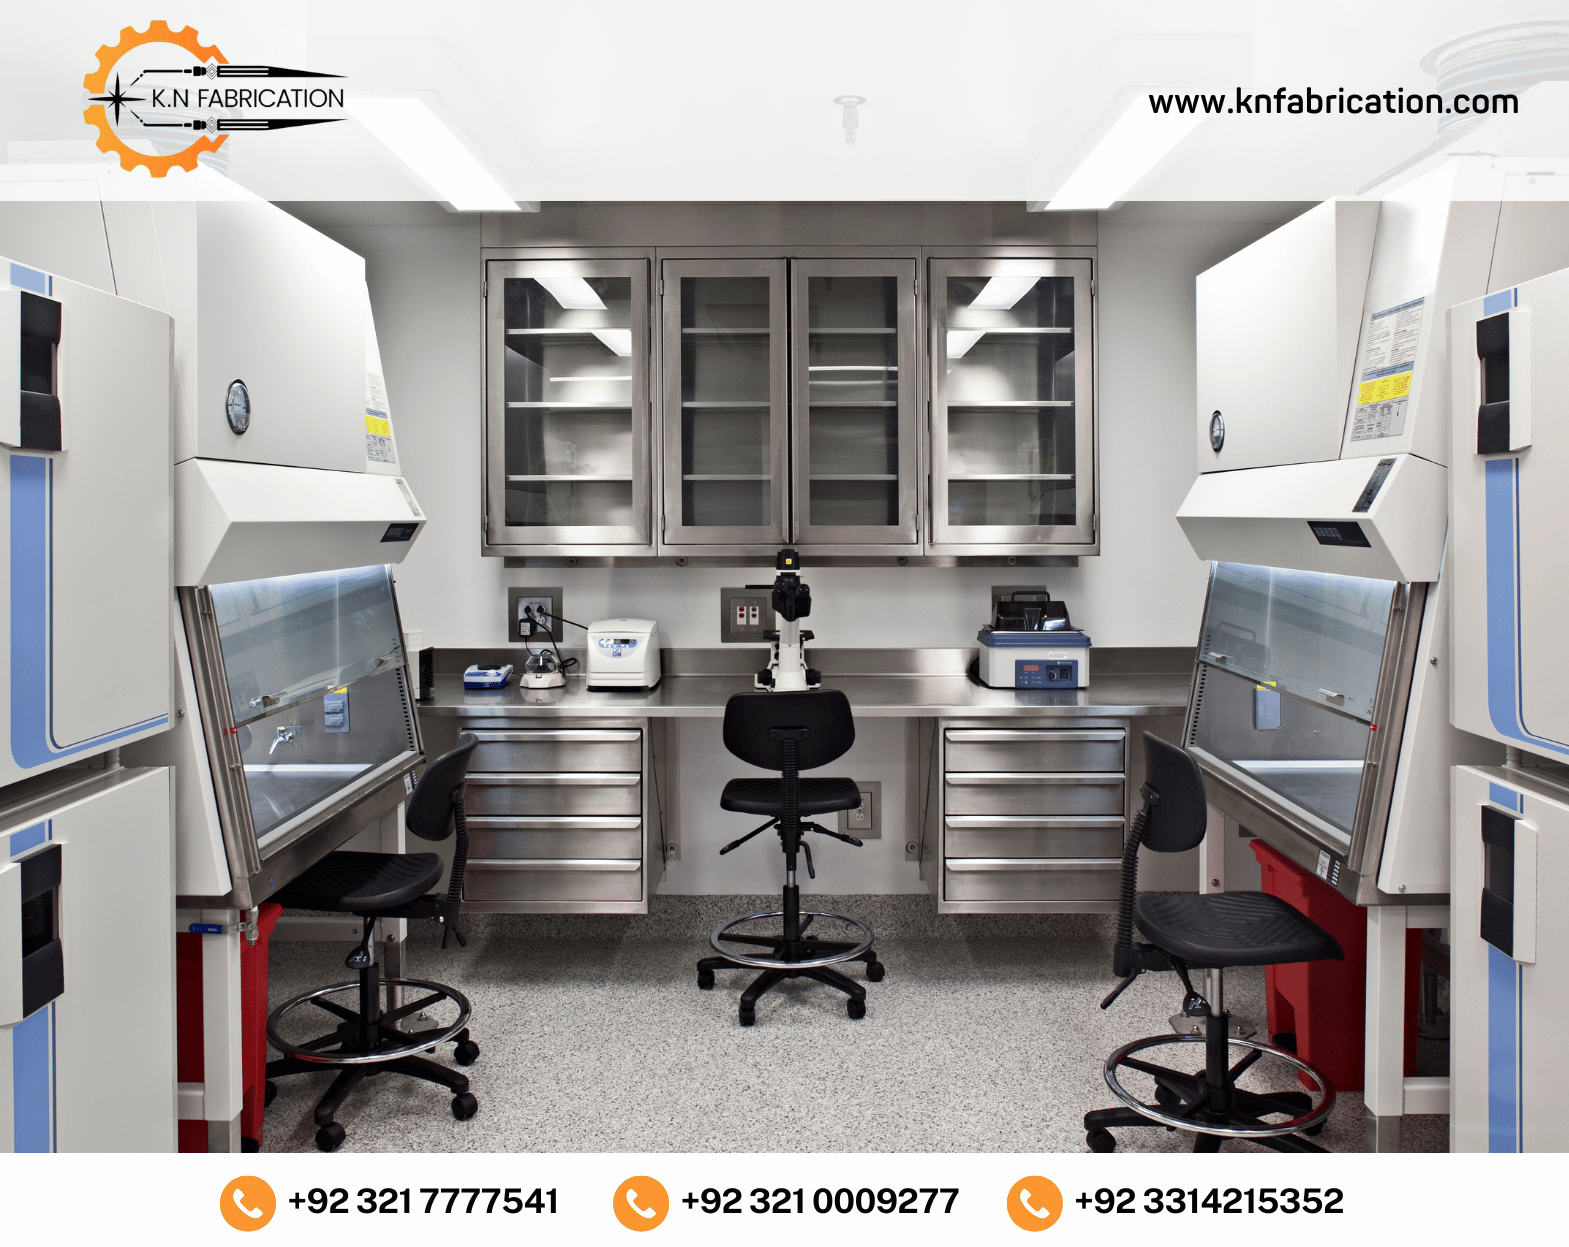 High-quality SS laboratory furniture in Pakistan by K.N Fabrication